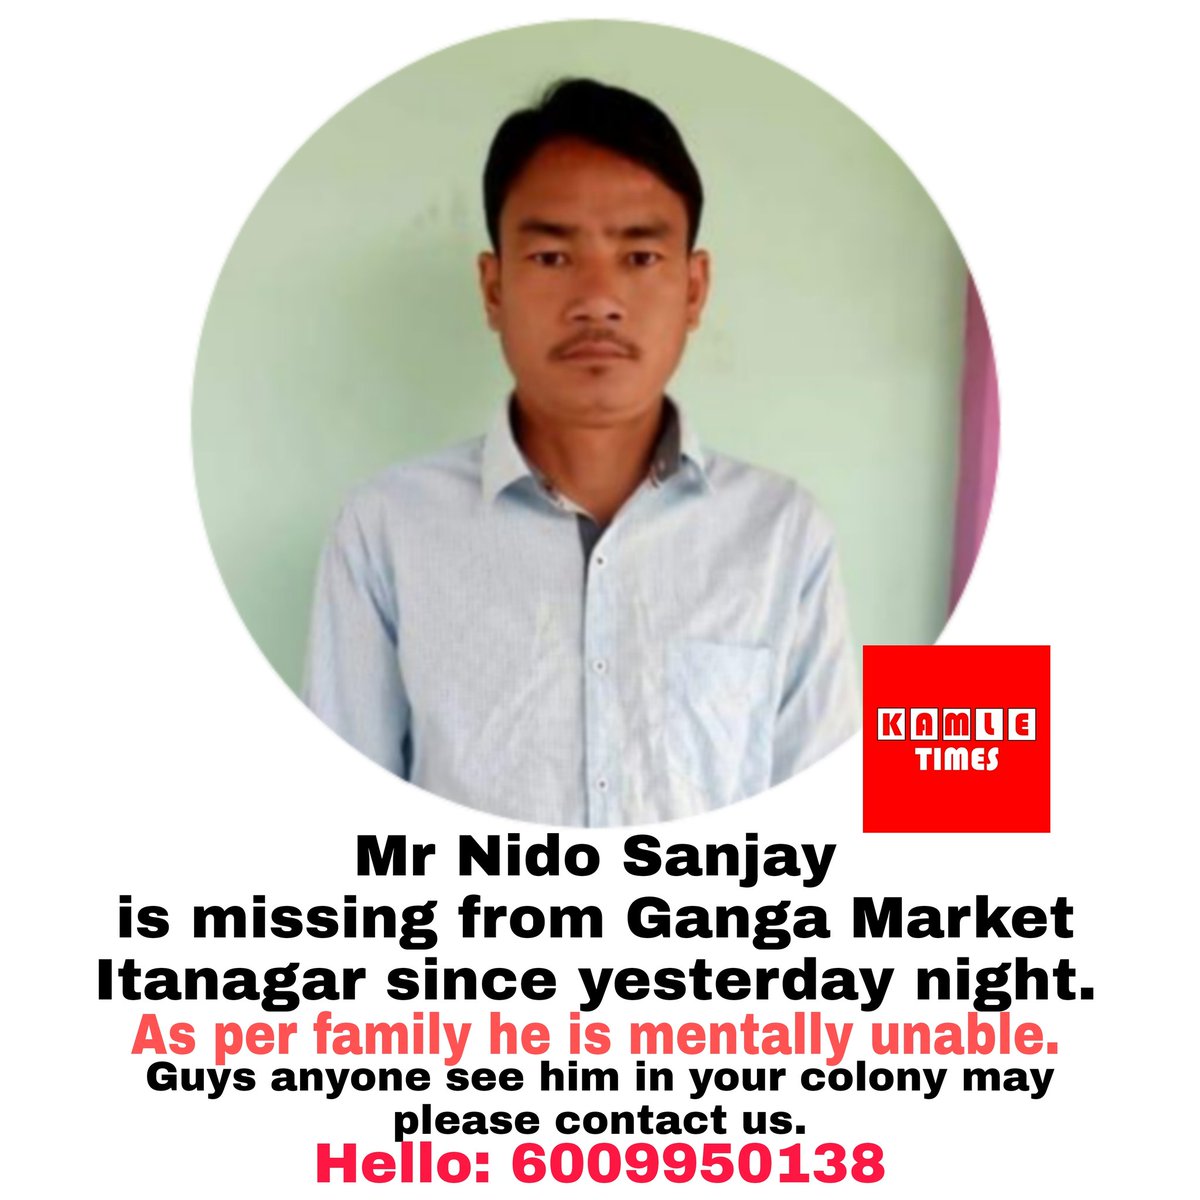 If anyone of you have seen him in your respective colony within ICR may contact us. @amarsopung @PremTaba @Jarpum @eclectictweets @mozing6 @KapuSanjay @dewan761 @ThaddeusTechi5 @PremTallong